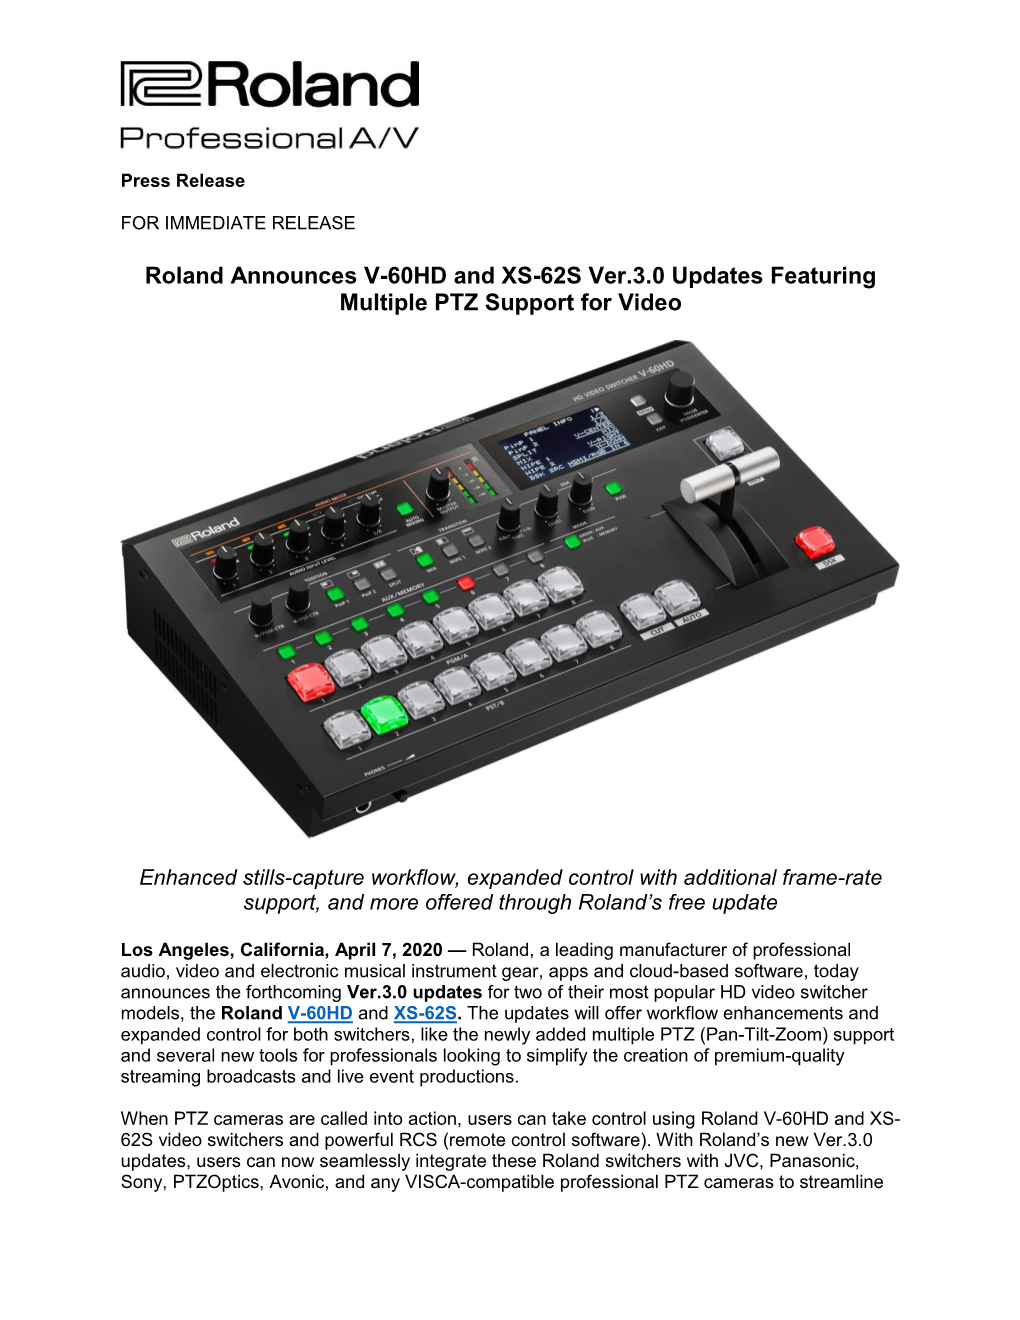 Roland Announces V-60HD and XS-62S Ver.3.0 Updates Featuring Multiple PTZ Support for Video